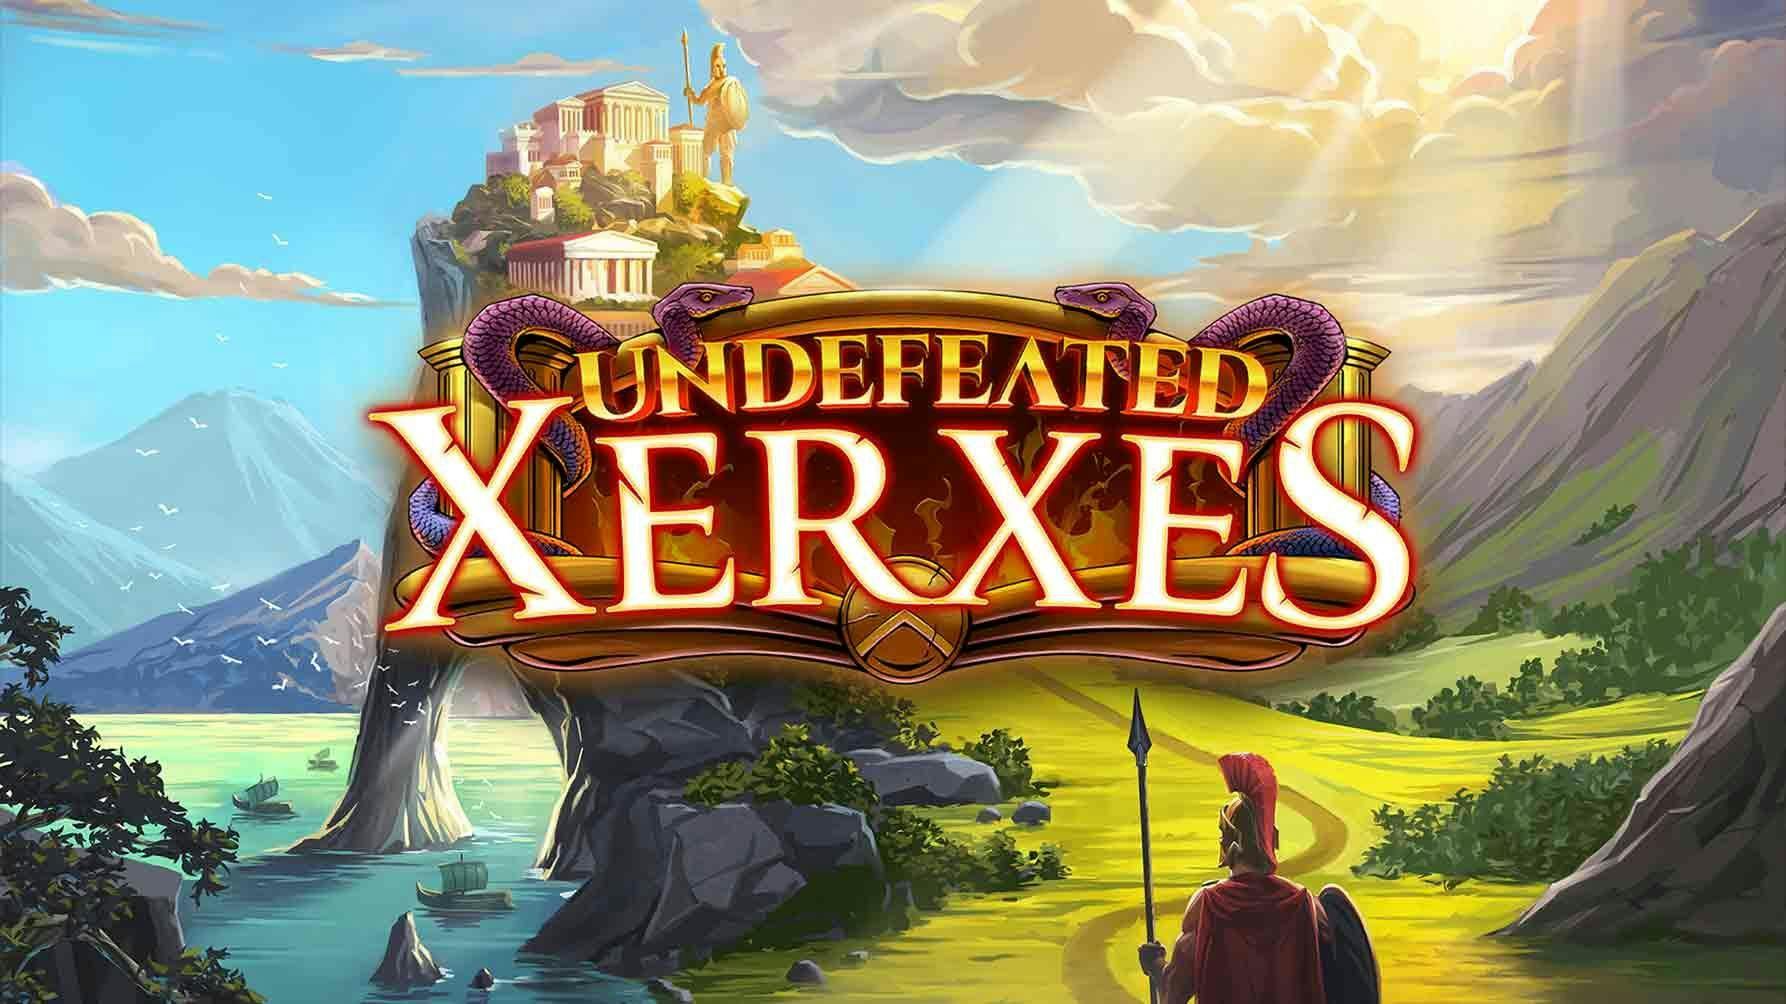 Undefeated Xerxes Slot Machine Online Free Game Play